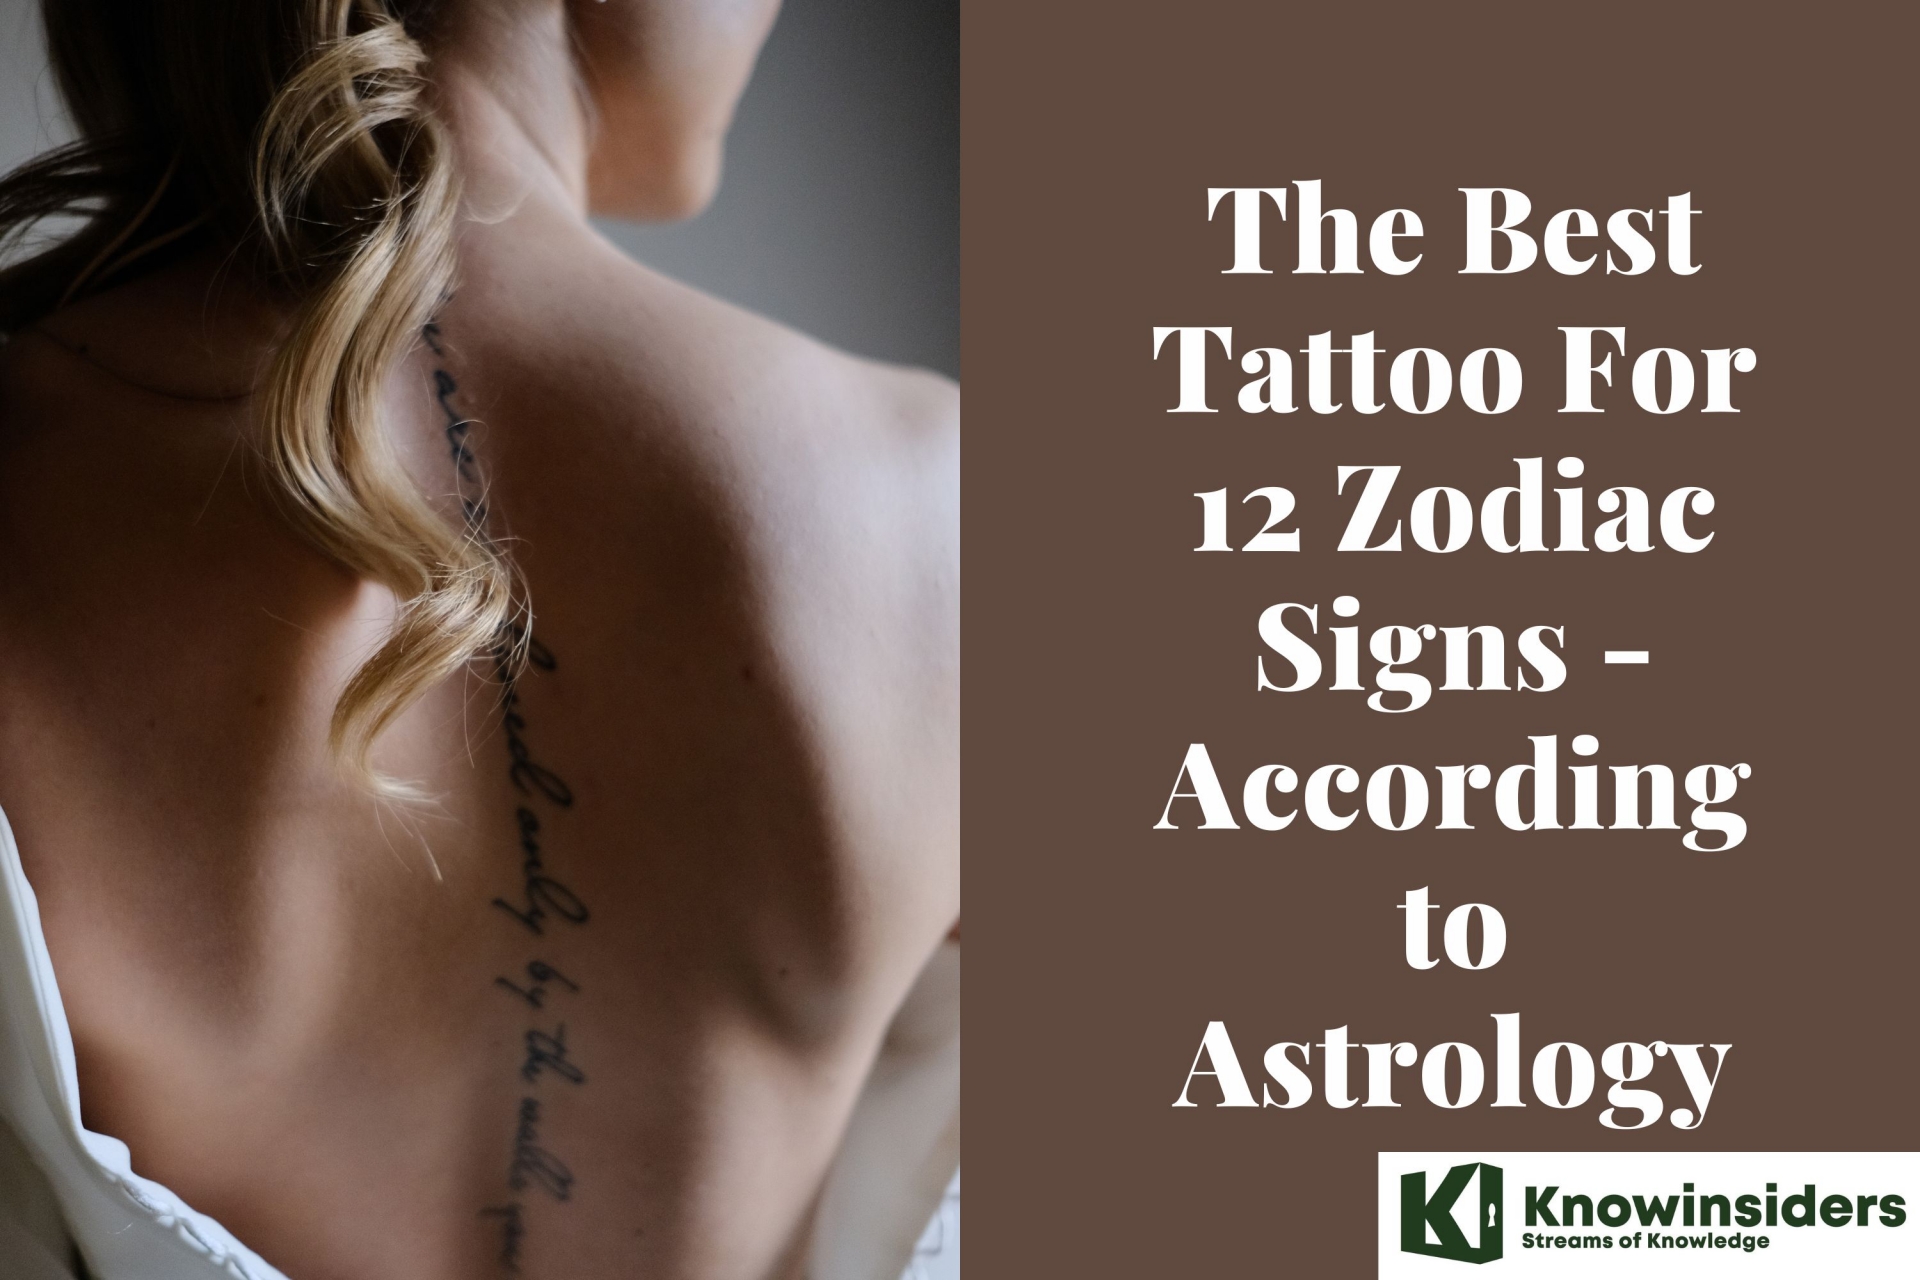 The Perfect Tattoos for 12 Zodiac Signs